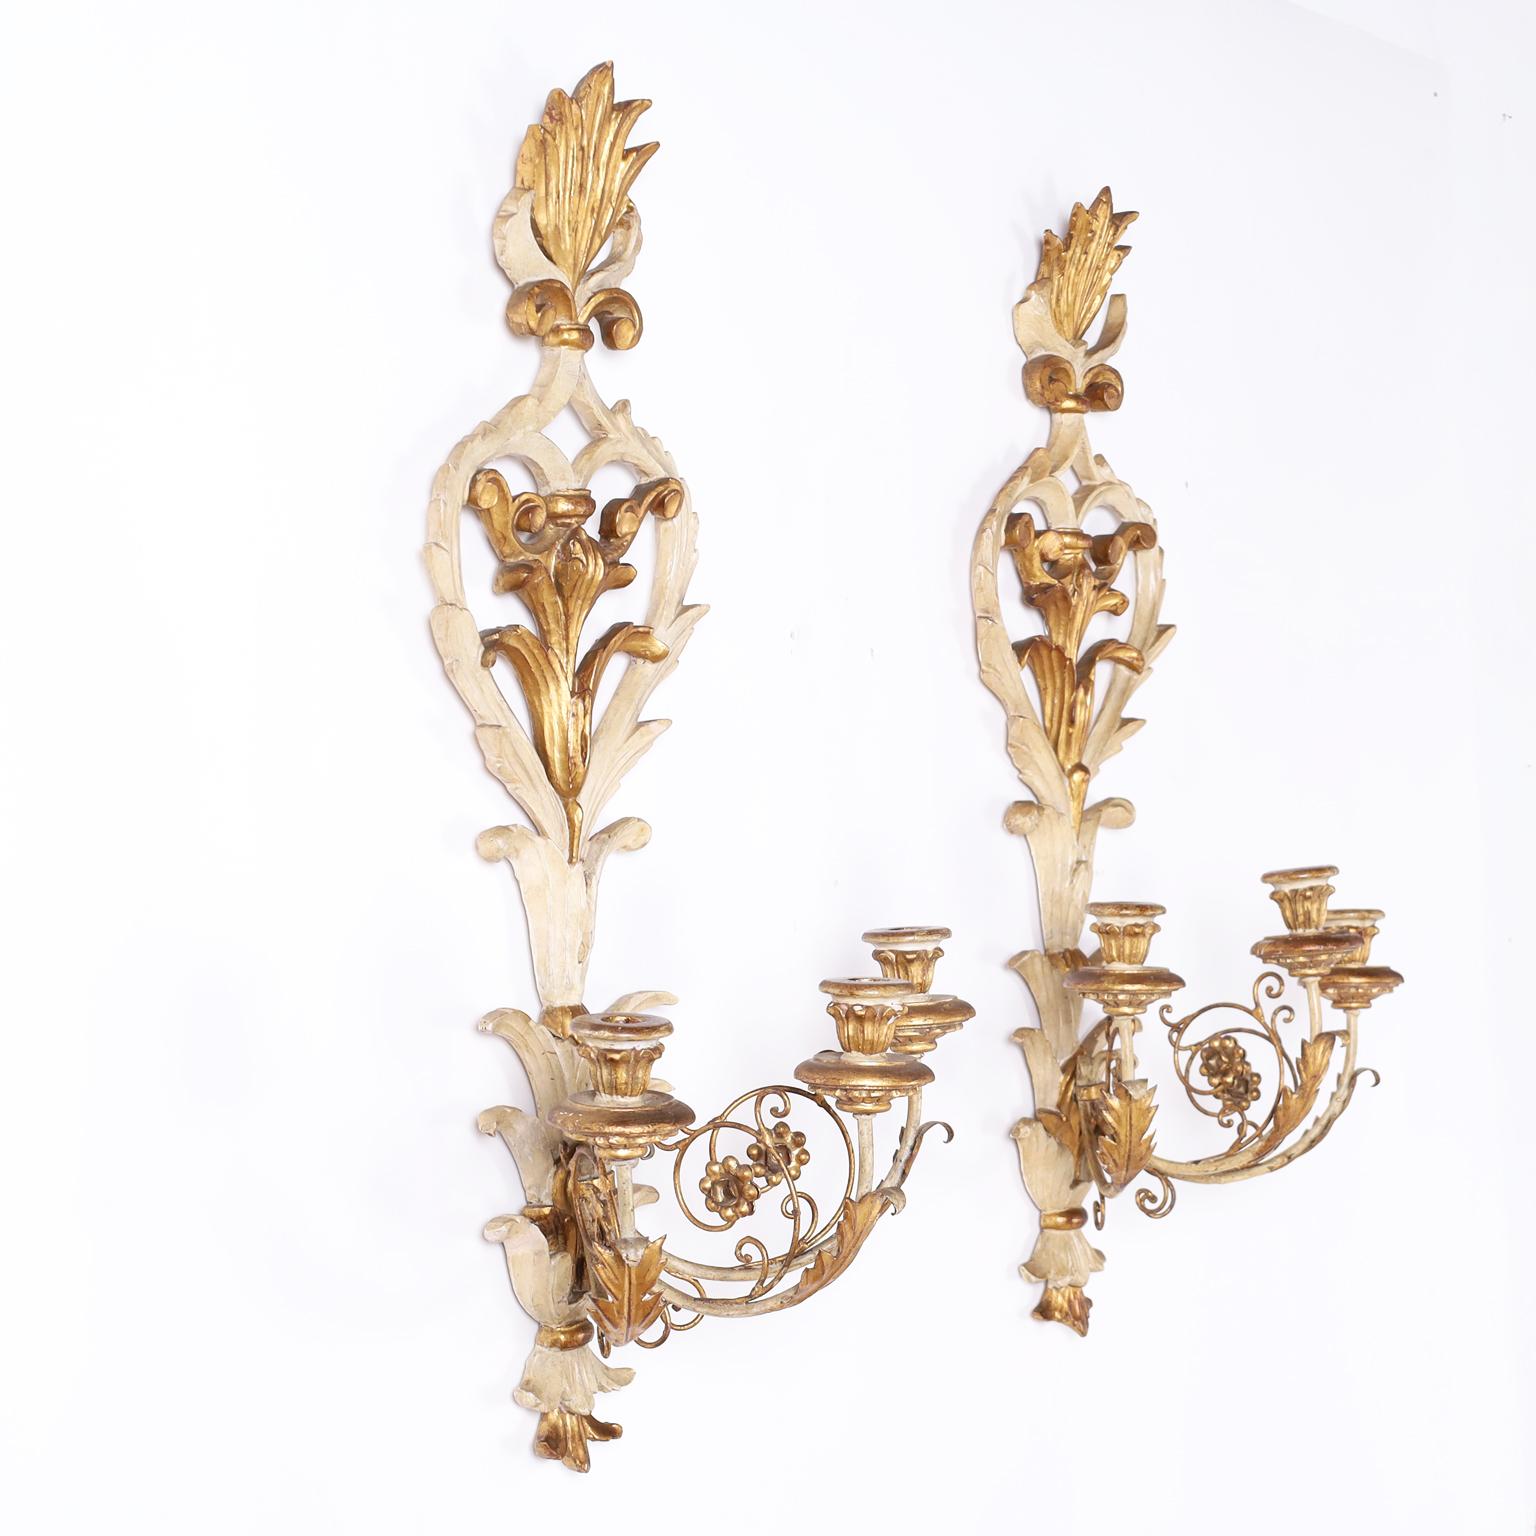 Pair of Italian sconces expertly carved with the original aged paint and gilt highlights, having a flame at the top and acanthus leaves over three metal arms with acanthus leaves and floral designs supporting carved candle cups.
   